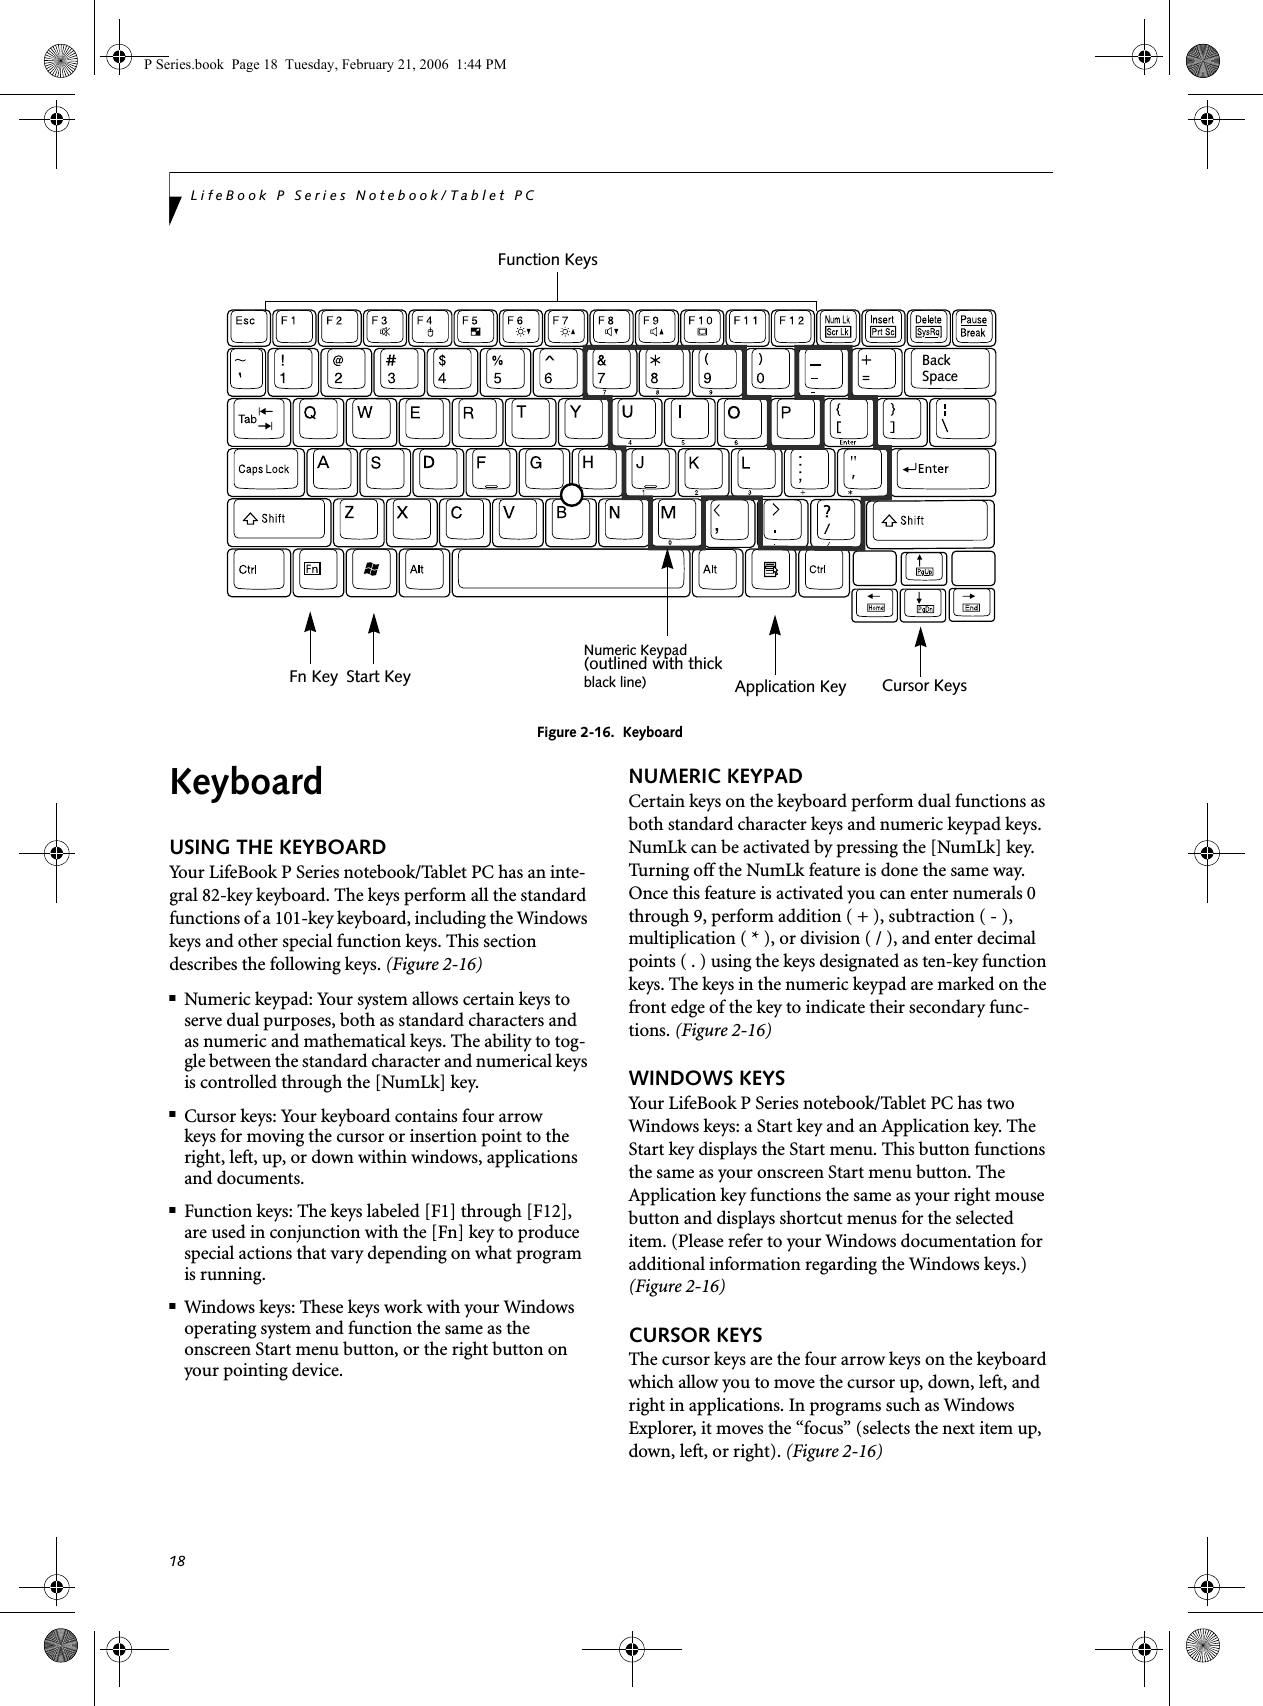 18LifeBook P Series Notebook/Tablet PCFigure 2-16.  KeyboardKeyboardUSING THE KEYBOARDYour LifeBook P Series notebook/Tablet PC has an inte-gral 82-key keyboard. The keys perform all the standard functions of a 101-key keyboard, including the Windows keys and other special function keys. This section describes the following keys. (Figure 2-16)■Numeric keypad: Your system allows certain keys to serve dual purposes, both as standard characters and as numeric and mathematical keys. The ability to tog-gle between the standard character and numerical keys is controlled through the [NumLk] key.■Cursor keys: Your keyboard contains four arrowkeys for moving the cursor or insertion point to the right, left, up, or down within windows, applications and documents. ■Function keys: The keys labeled [F1] through [F12], are used in conjunction with the [Fn] key to produce special actions that vary depending on what program is running. ■Windows keys: These keys work with your Windows operating system and function the same as the onscreen Start menu button, or the right button on your pointing device.NUMERIC KEYPADCertain keys on the keyboard perform dual functions as both standard character keys and numeric keypad keys. NumLk can be activated by pressing the [NumLk] key. Turning off the NumLk feature is done the same way. Once this feature is activated you can enter numerals 0 through 9, perform addition ( + ), subtraction ( - ),multiplication ( * ), or division ( / ), and enter decimal points ( . ) using the keys designated as ten-key function keys. The keys in the numeric keypad are marked on the front edge of the key to indicate their secondary func-tions. (Figure 2-16) WINDOWS KEYSYour LifeBook P Series notebook/Tablet PC has two Windows keys: a Start key and an Application key. The Start key displays the Start menu. This button functions the same as your onscreen Start menu button. The Application key functions the same as your right mouse button and displays shortcut menus for the selected item. (Please refer to your Windows documentation for additional information regarding the Windows keys.) (Figure 2-16)CURSOR KEYSThe cursor keys are the four arrow keys on the keyboard which allow you to move the cursor up, down, left, and right in applications. In programs such as Windows Explorer, it moves the “focus” (selects the next item up, down, left, or right). (Figure 2-16)Back SpaceFn Key Start KeyFunction KeysNumeric KeypadApplication Key Cursor Keys(outlined with thickblack line) P Series.book  Page 18  Tuesday, February 21, 2006  1:44 PM